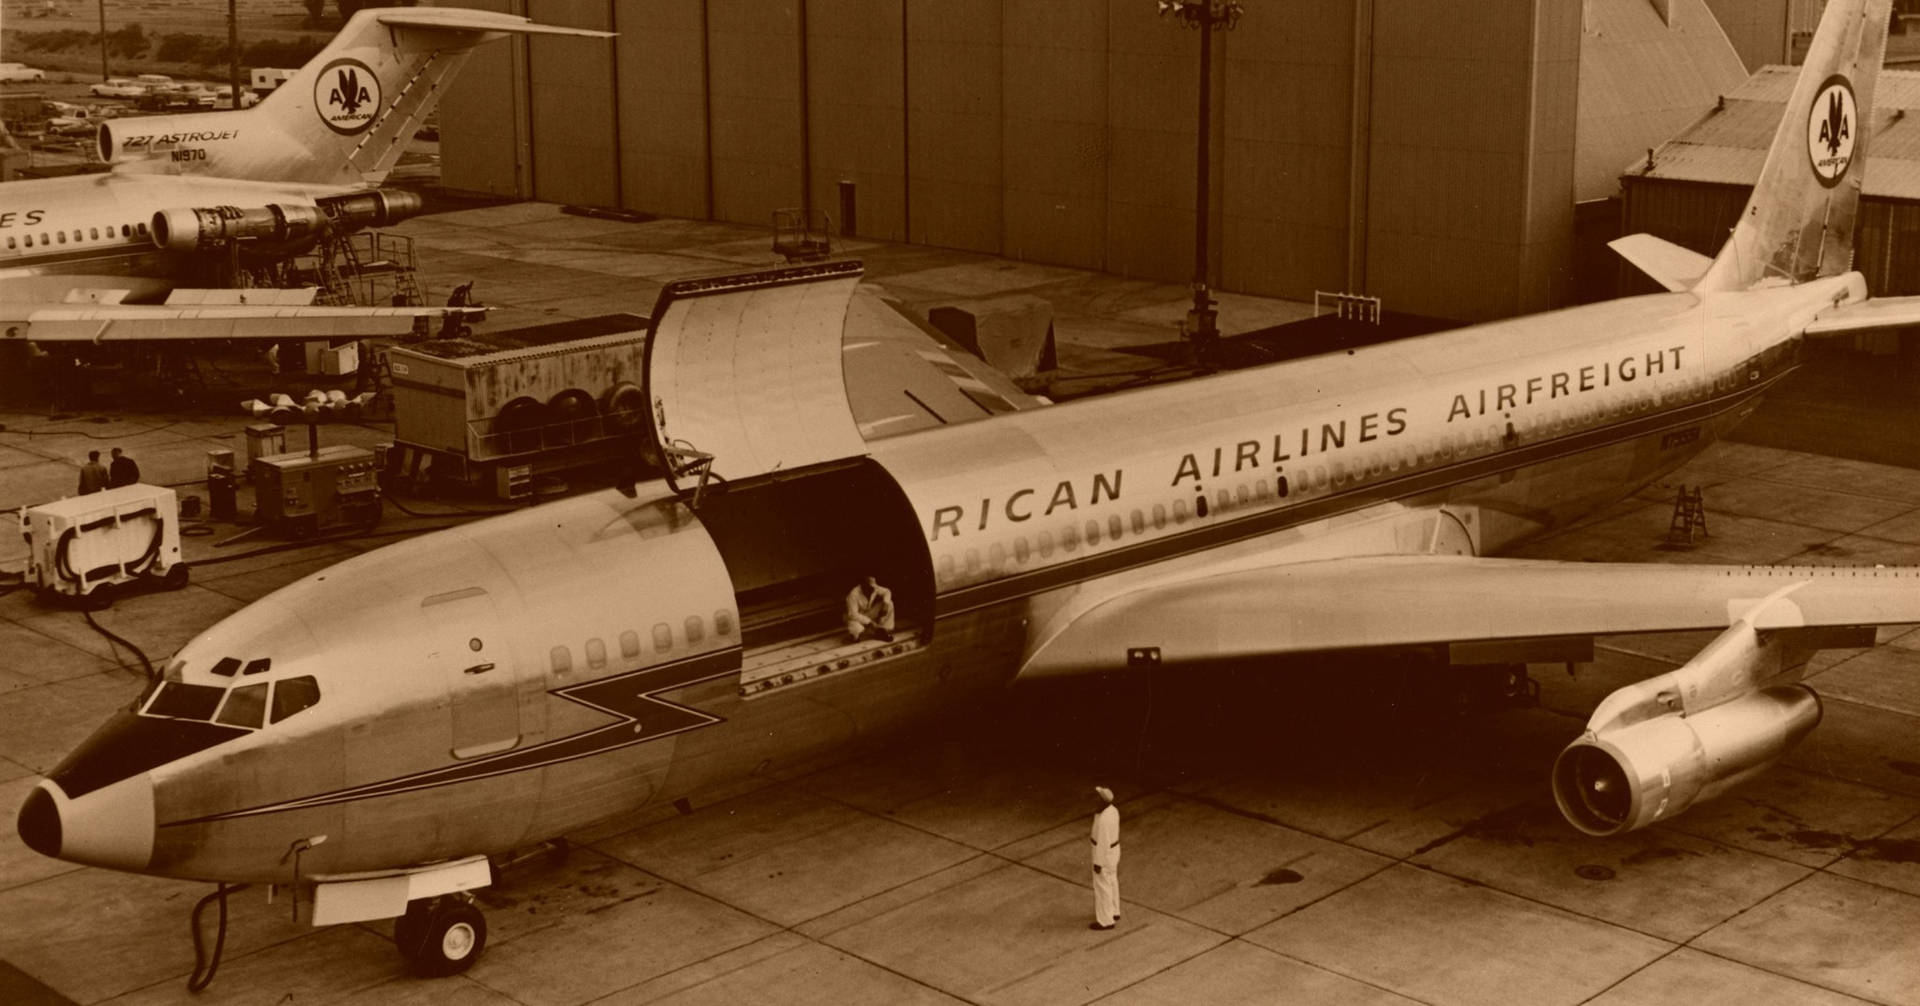 Vintage American Airlines Airfreight Wallpaper